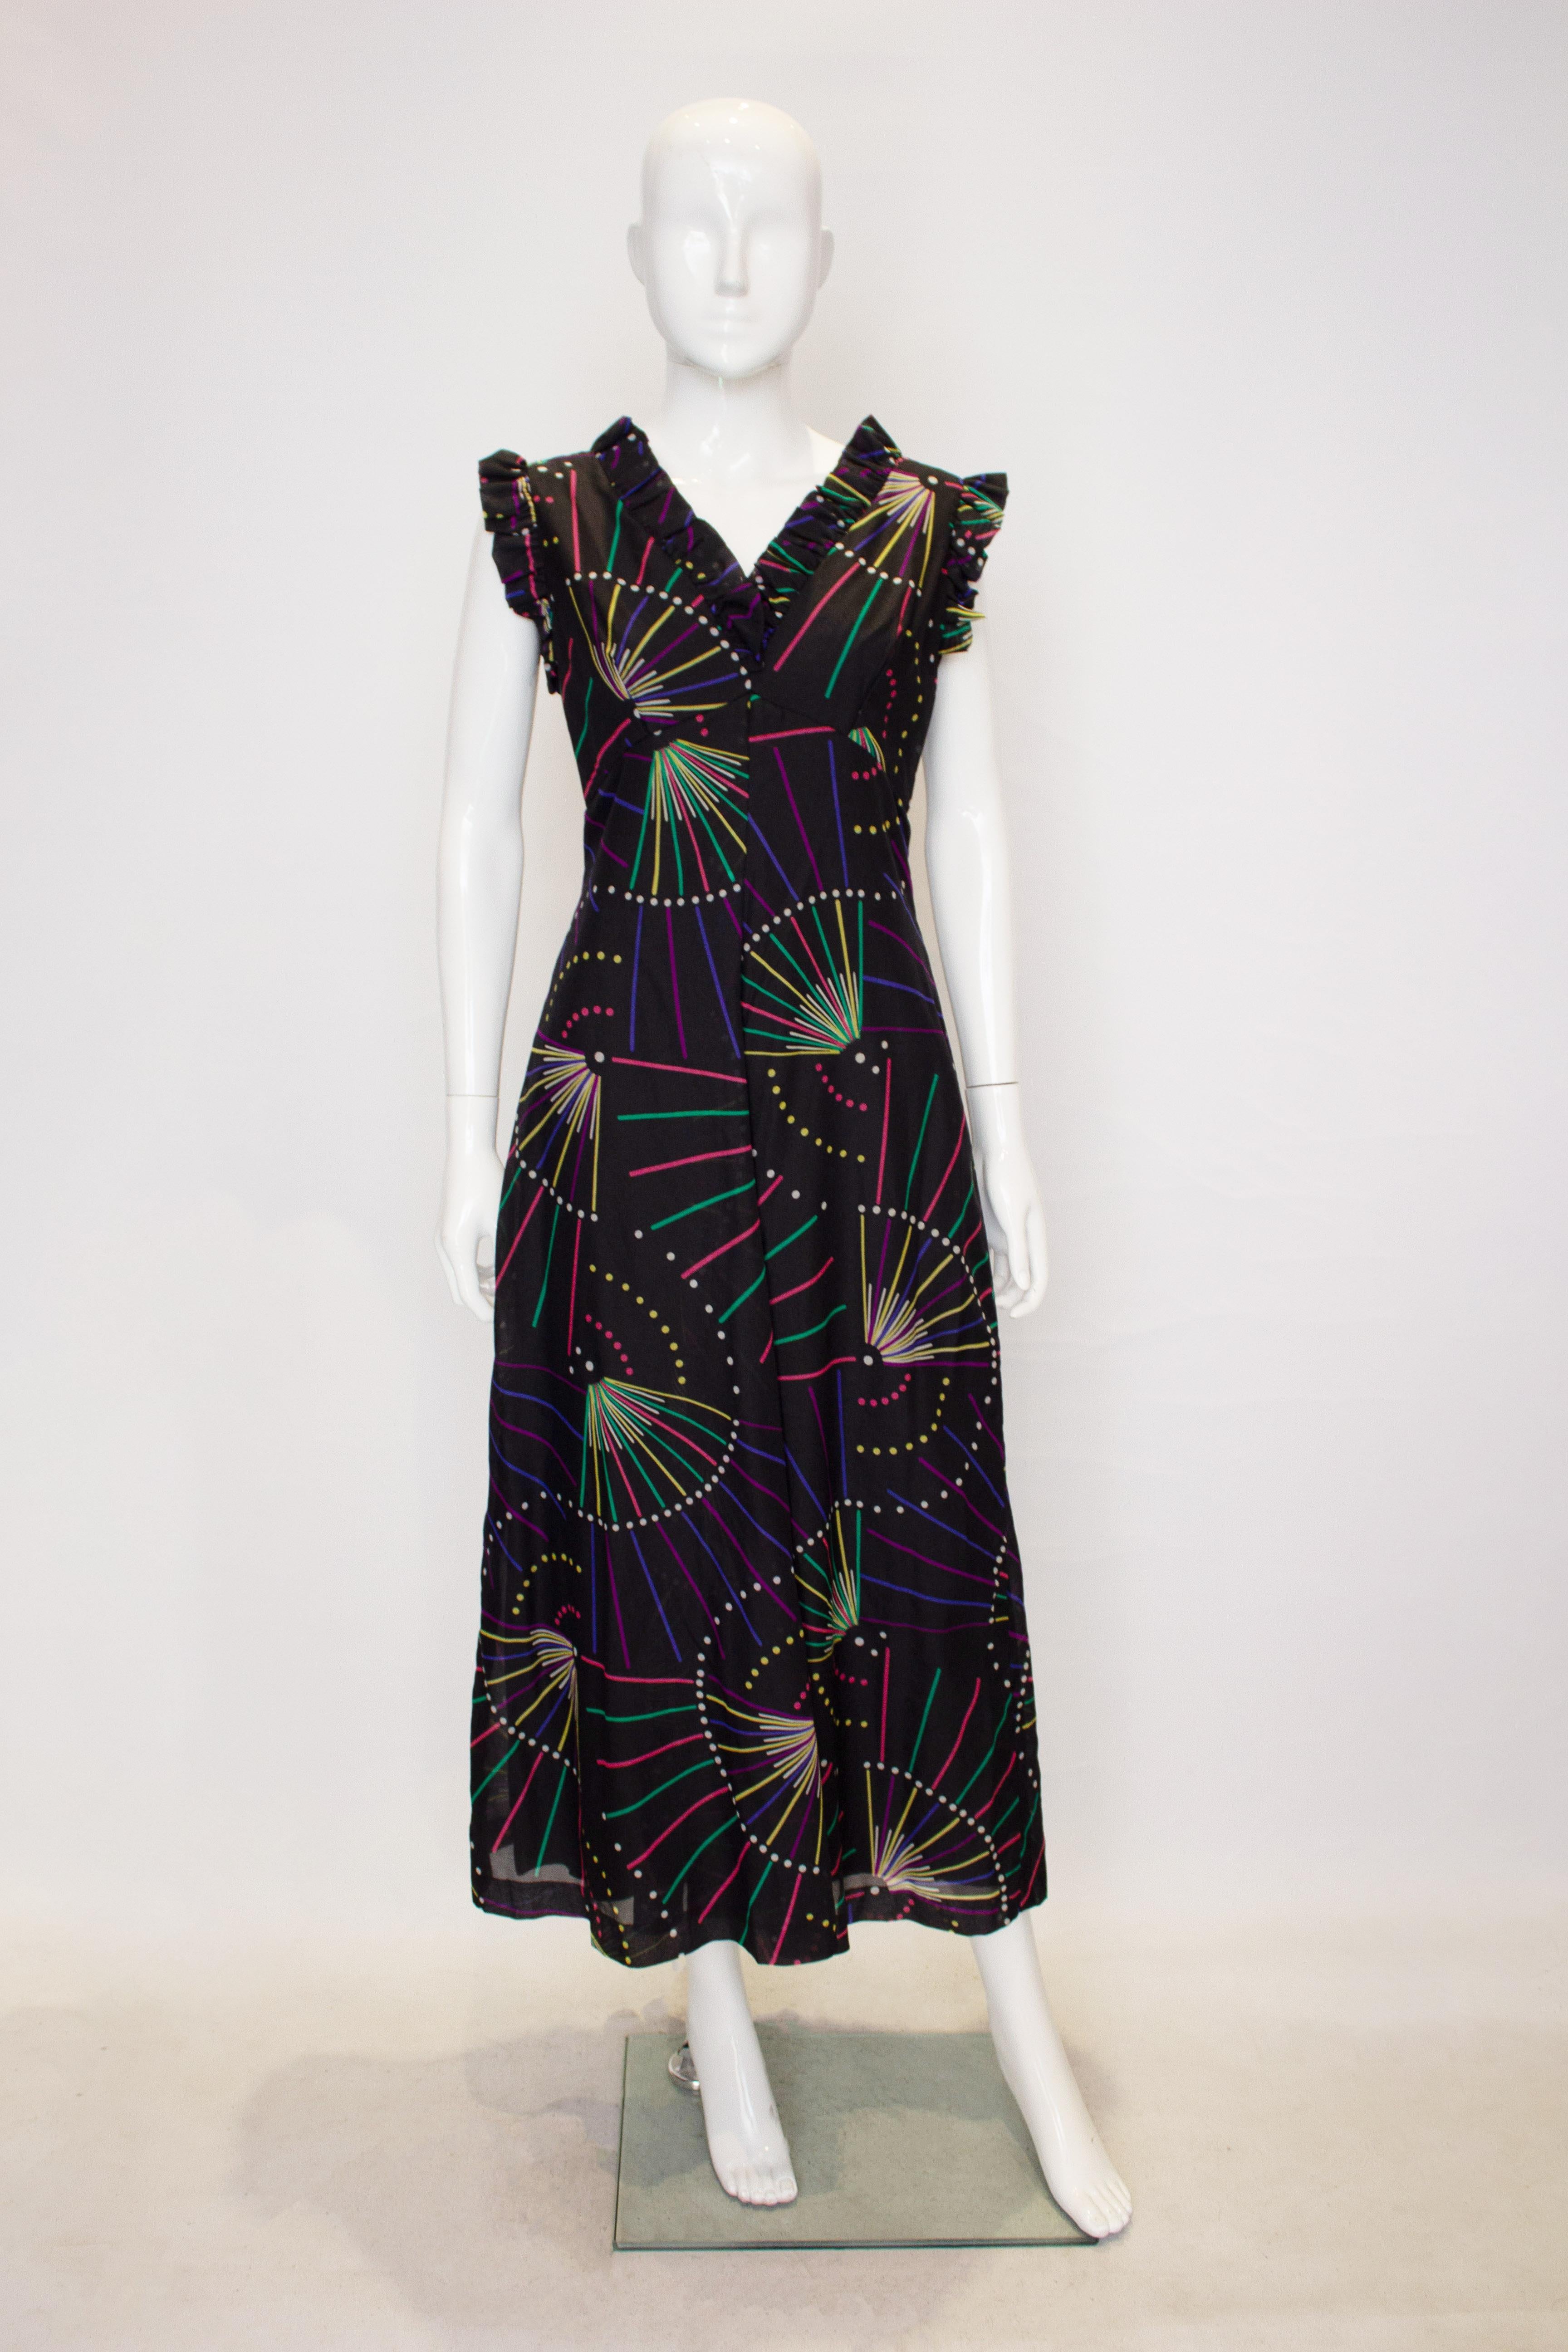 A great vintage party dress by Feminette. The dress has a v neckline and backline with frill detail.
It has a black background with pink, yellow  green and white detail.  The dress is fully lined and has a back central zip.